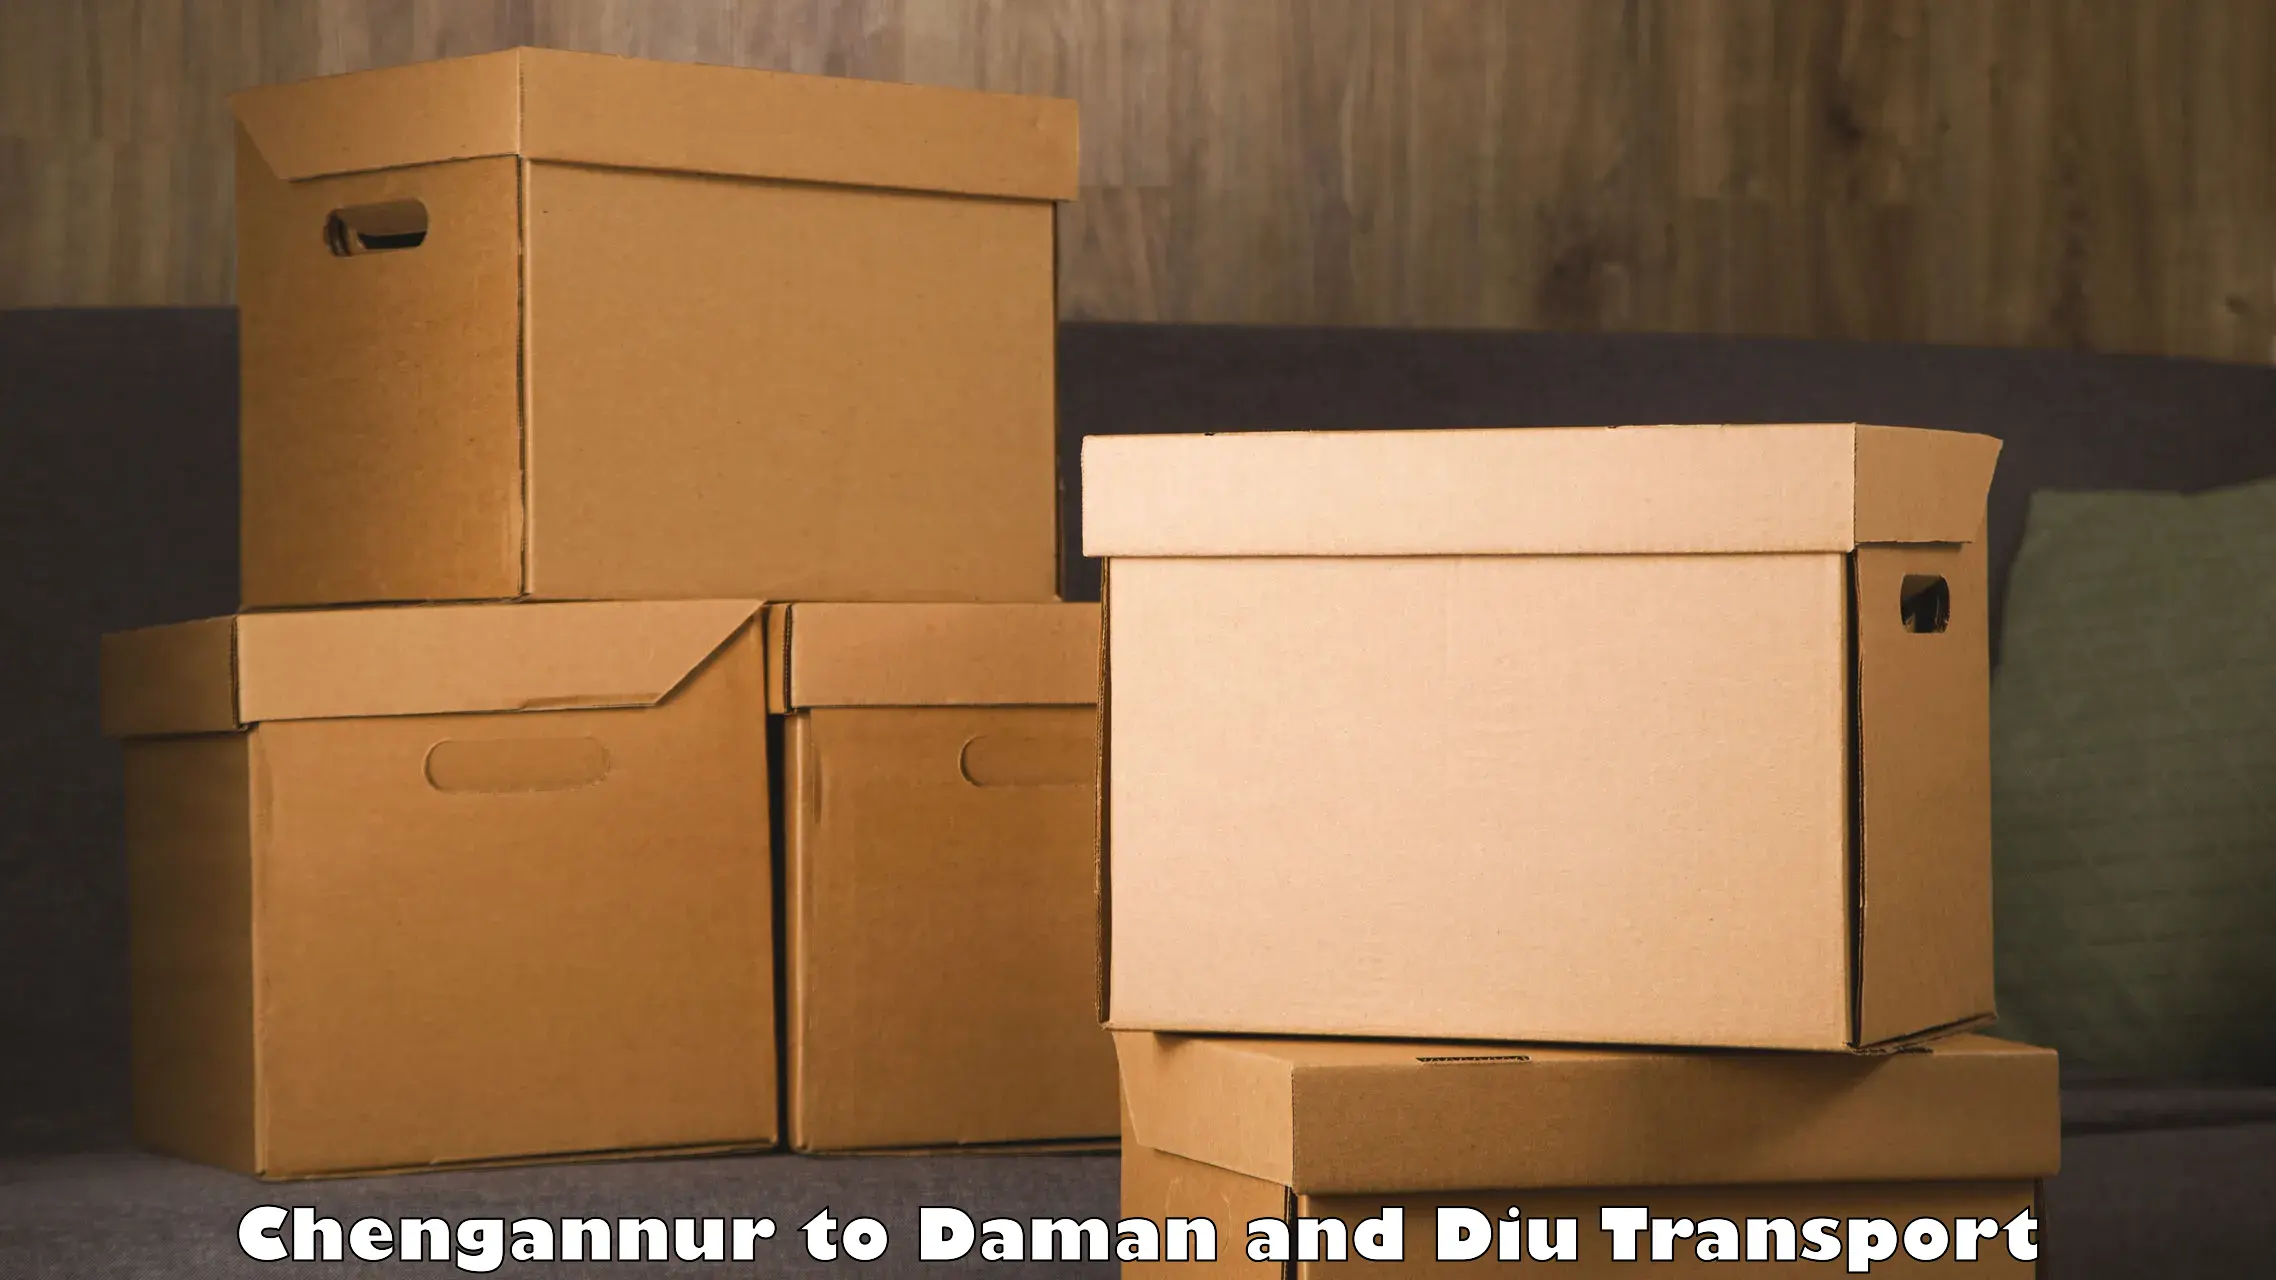 Daily transport service Chengannur to Daman and Diu